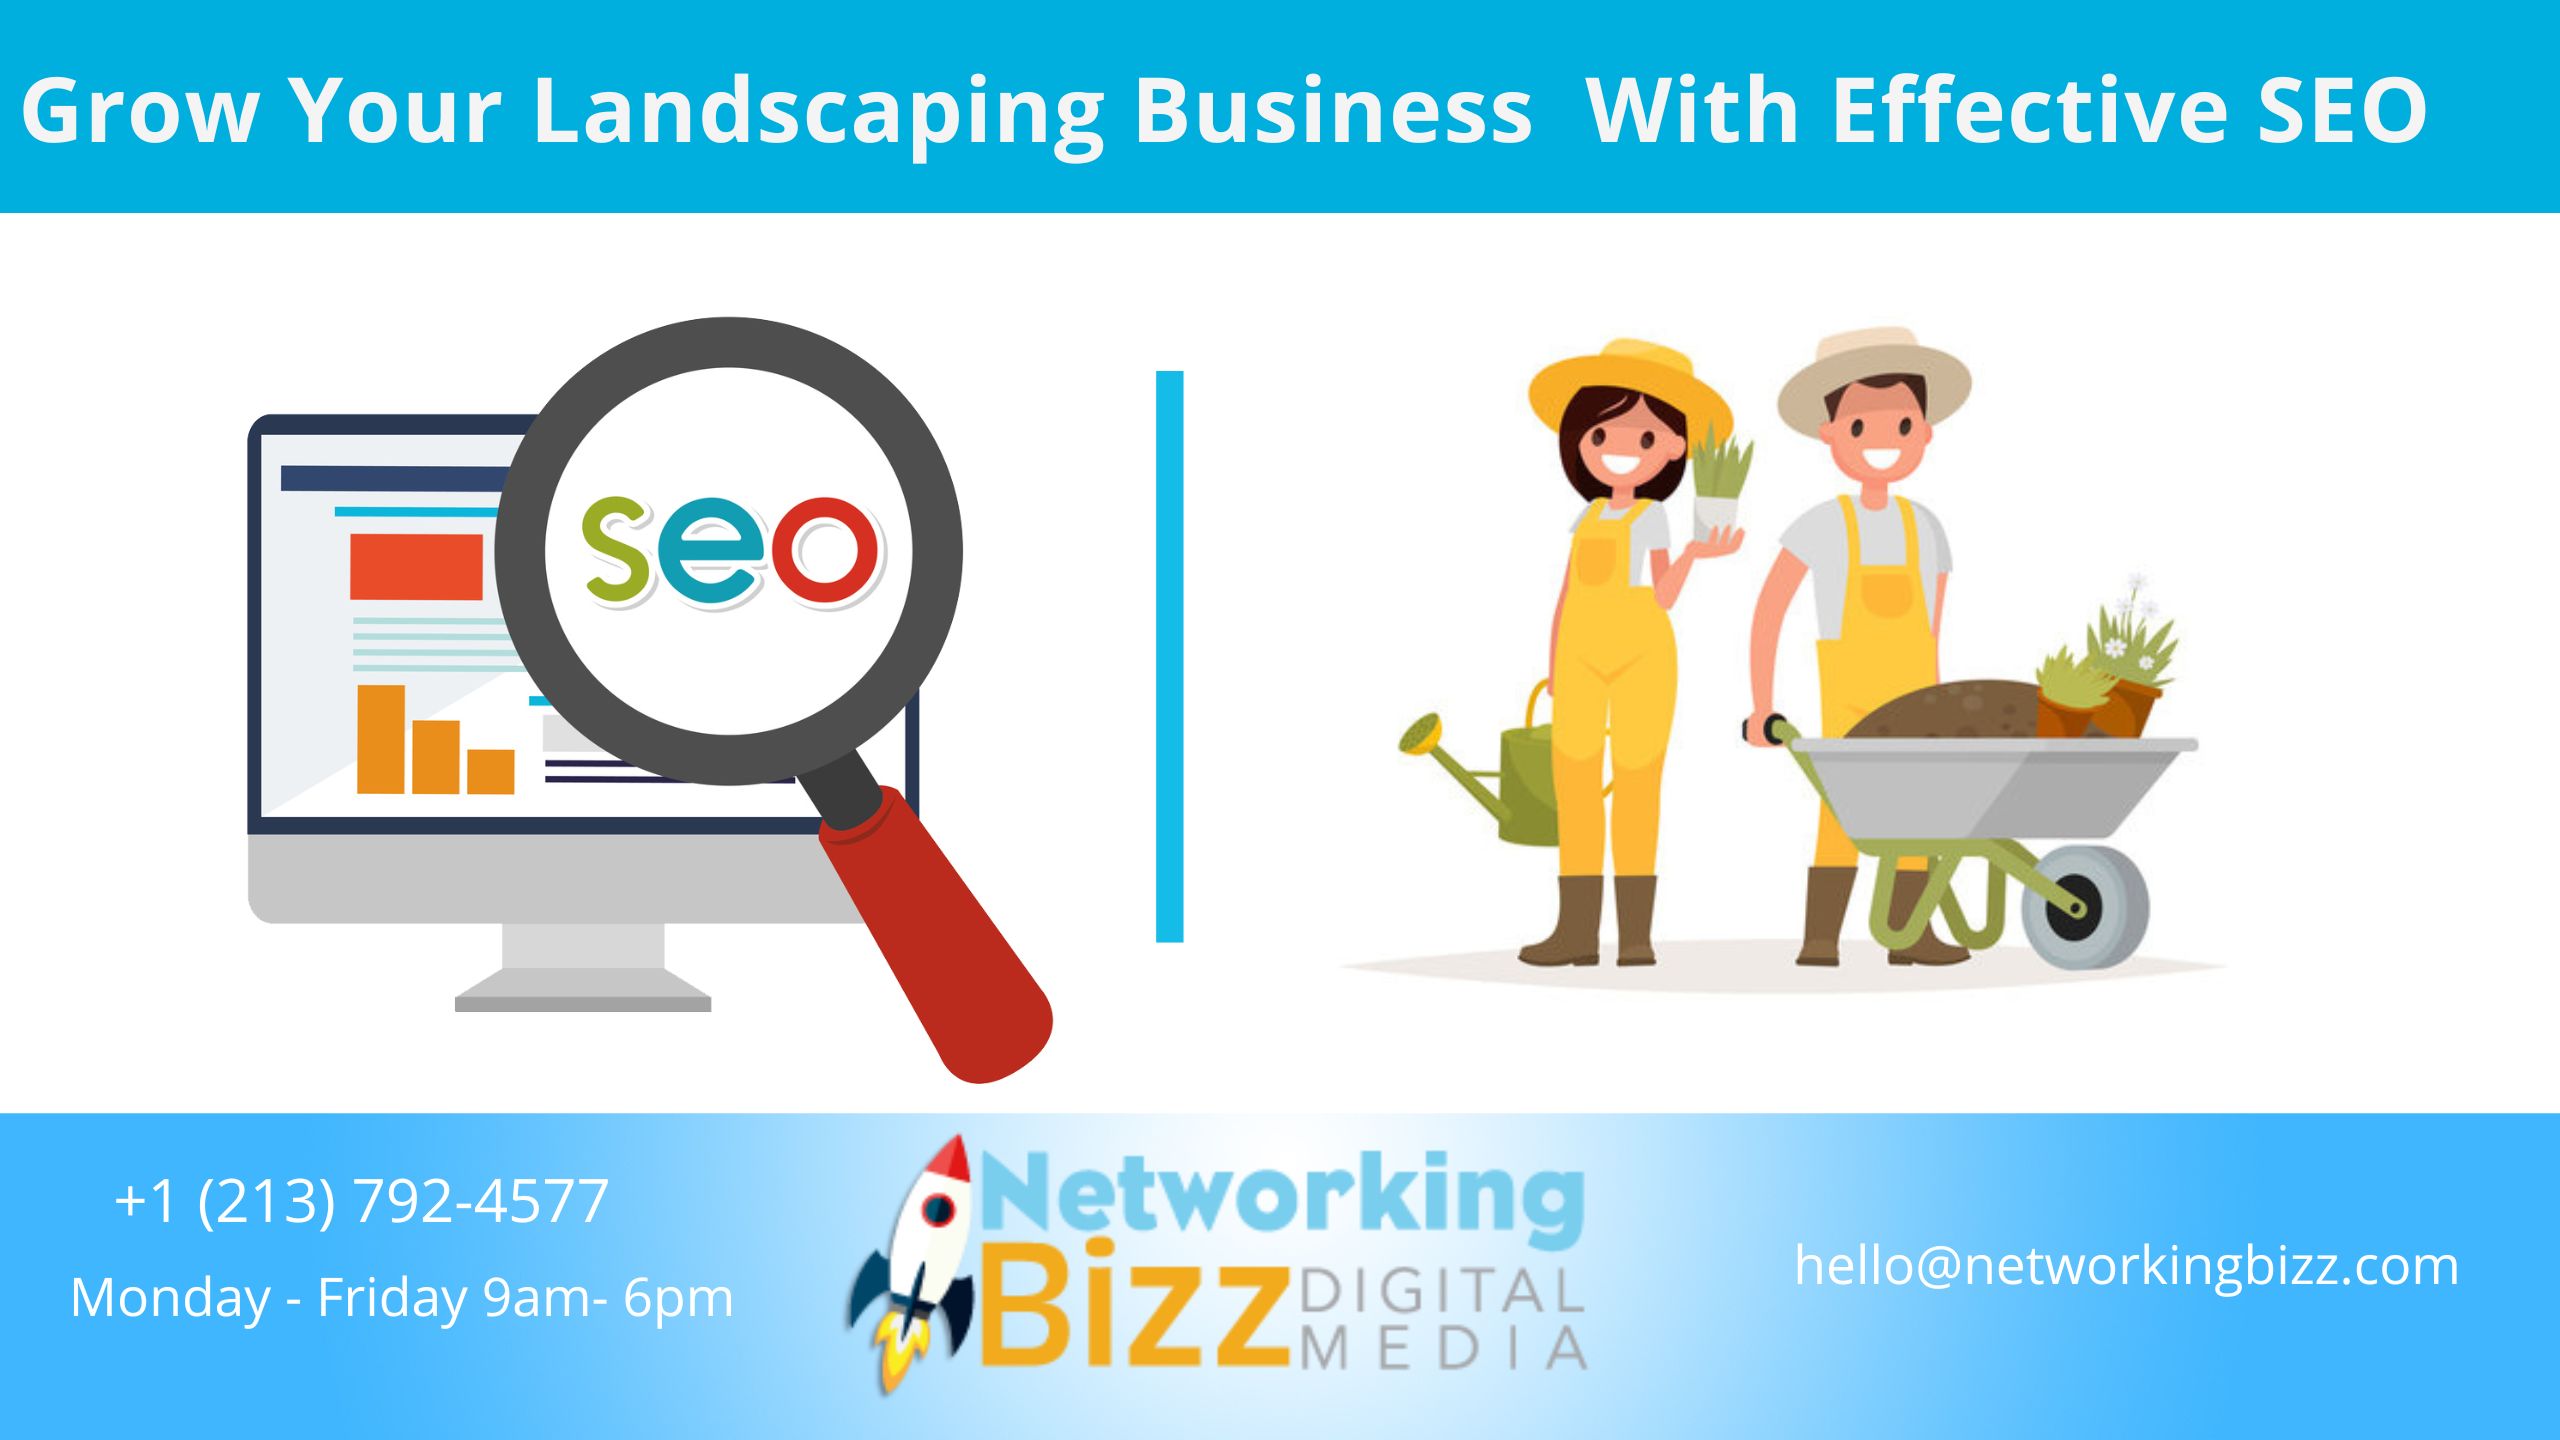 Grow Your Landscaping Business With Effective SEO